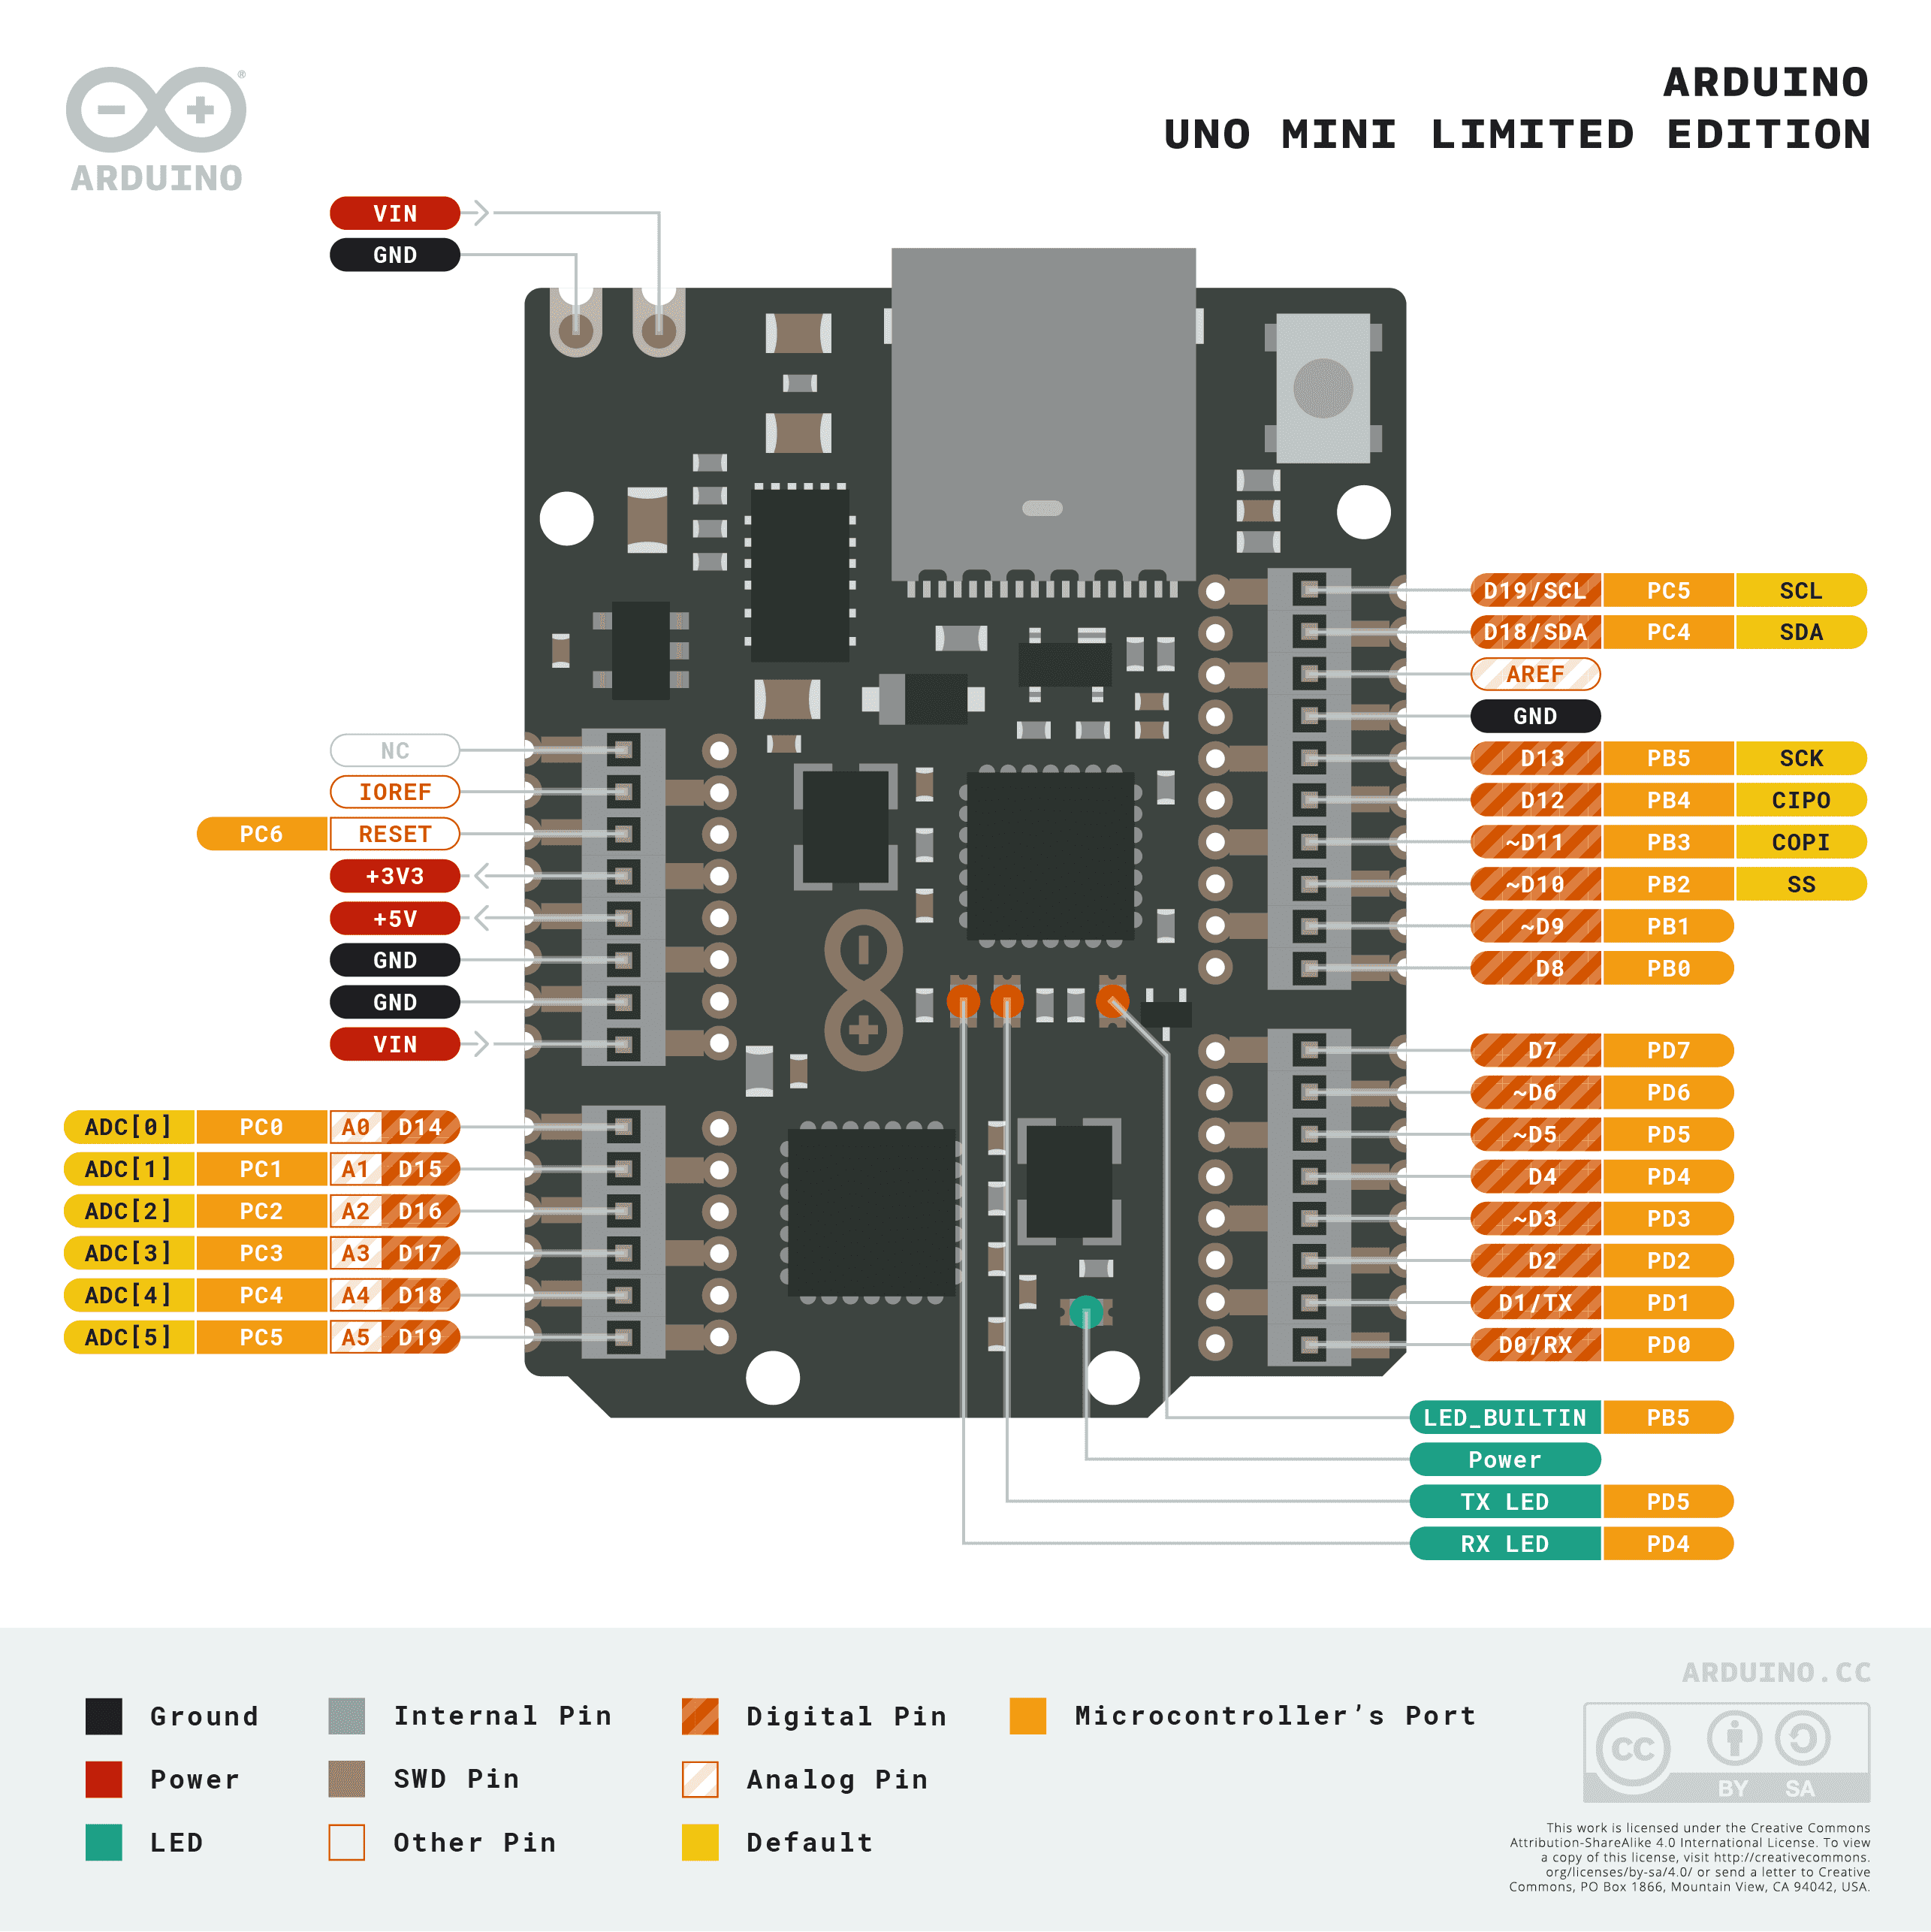 A Guide to the Arduino UNO Mini Limited Edition